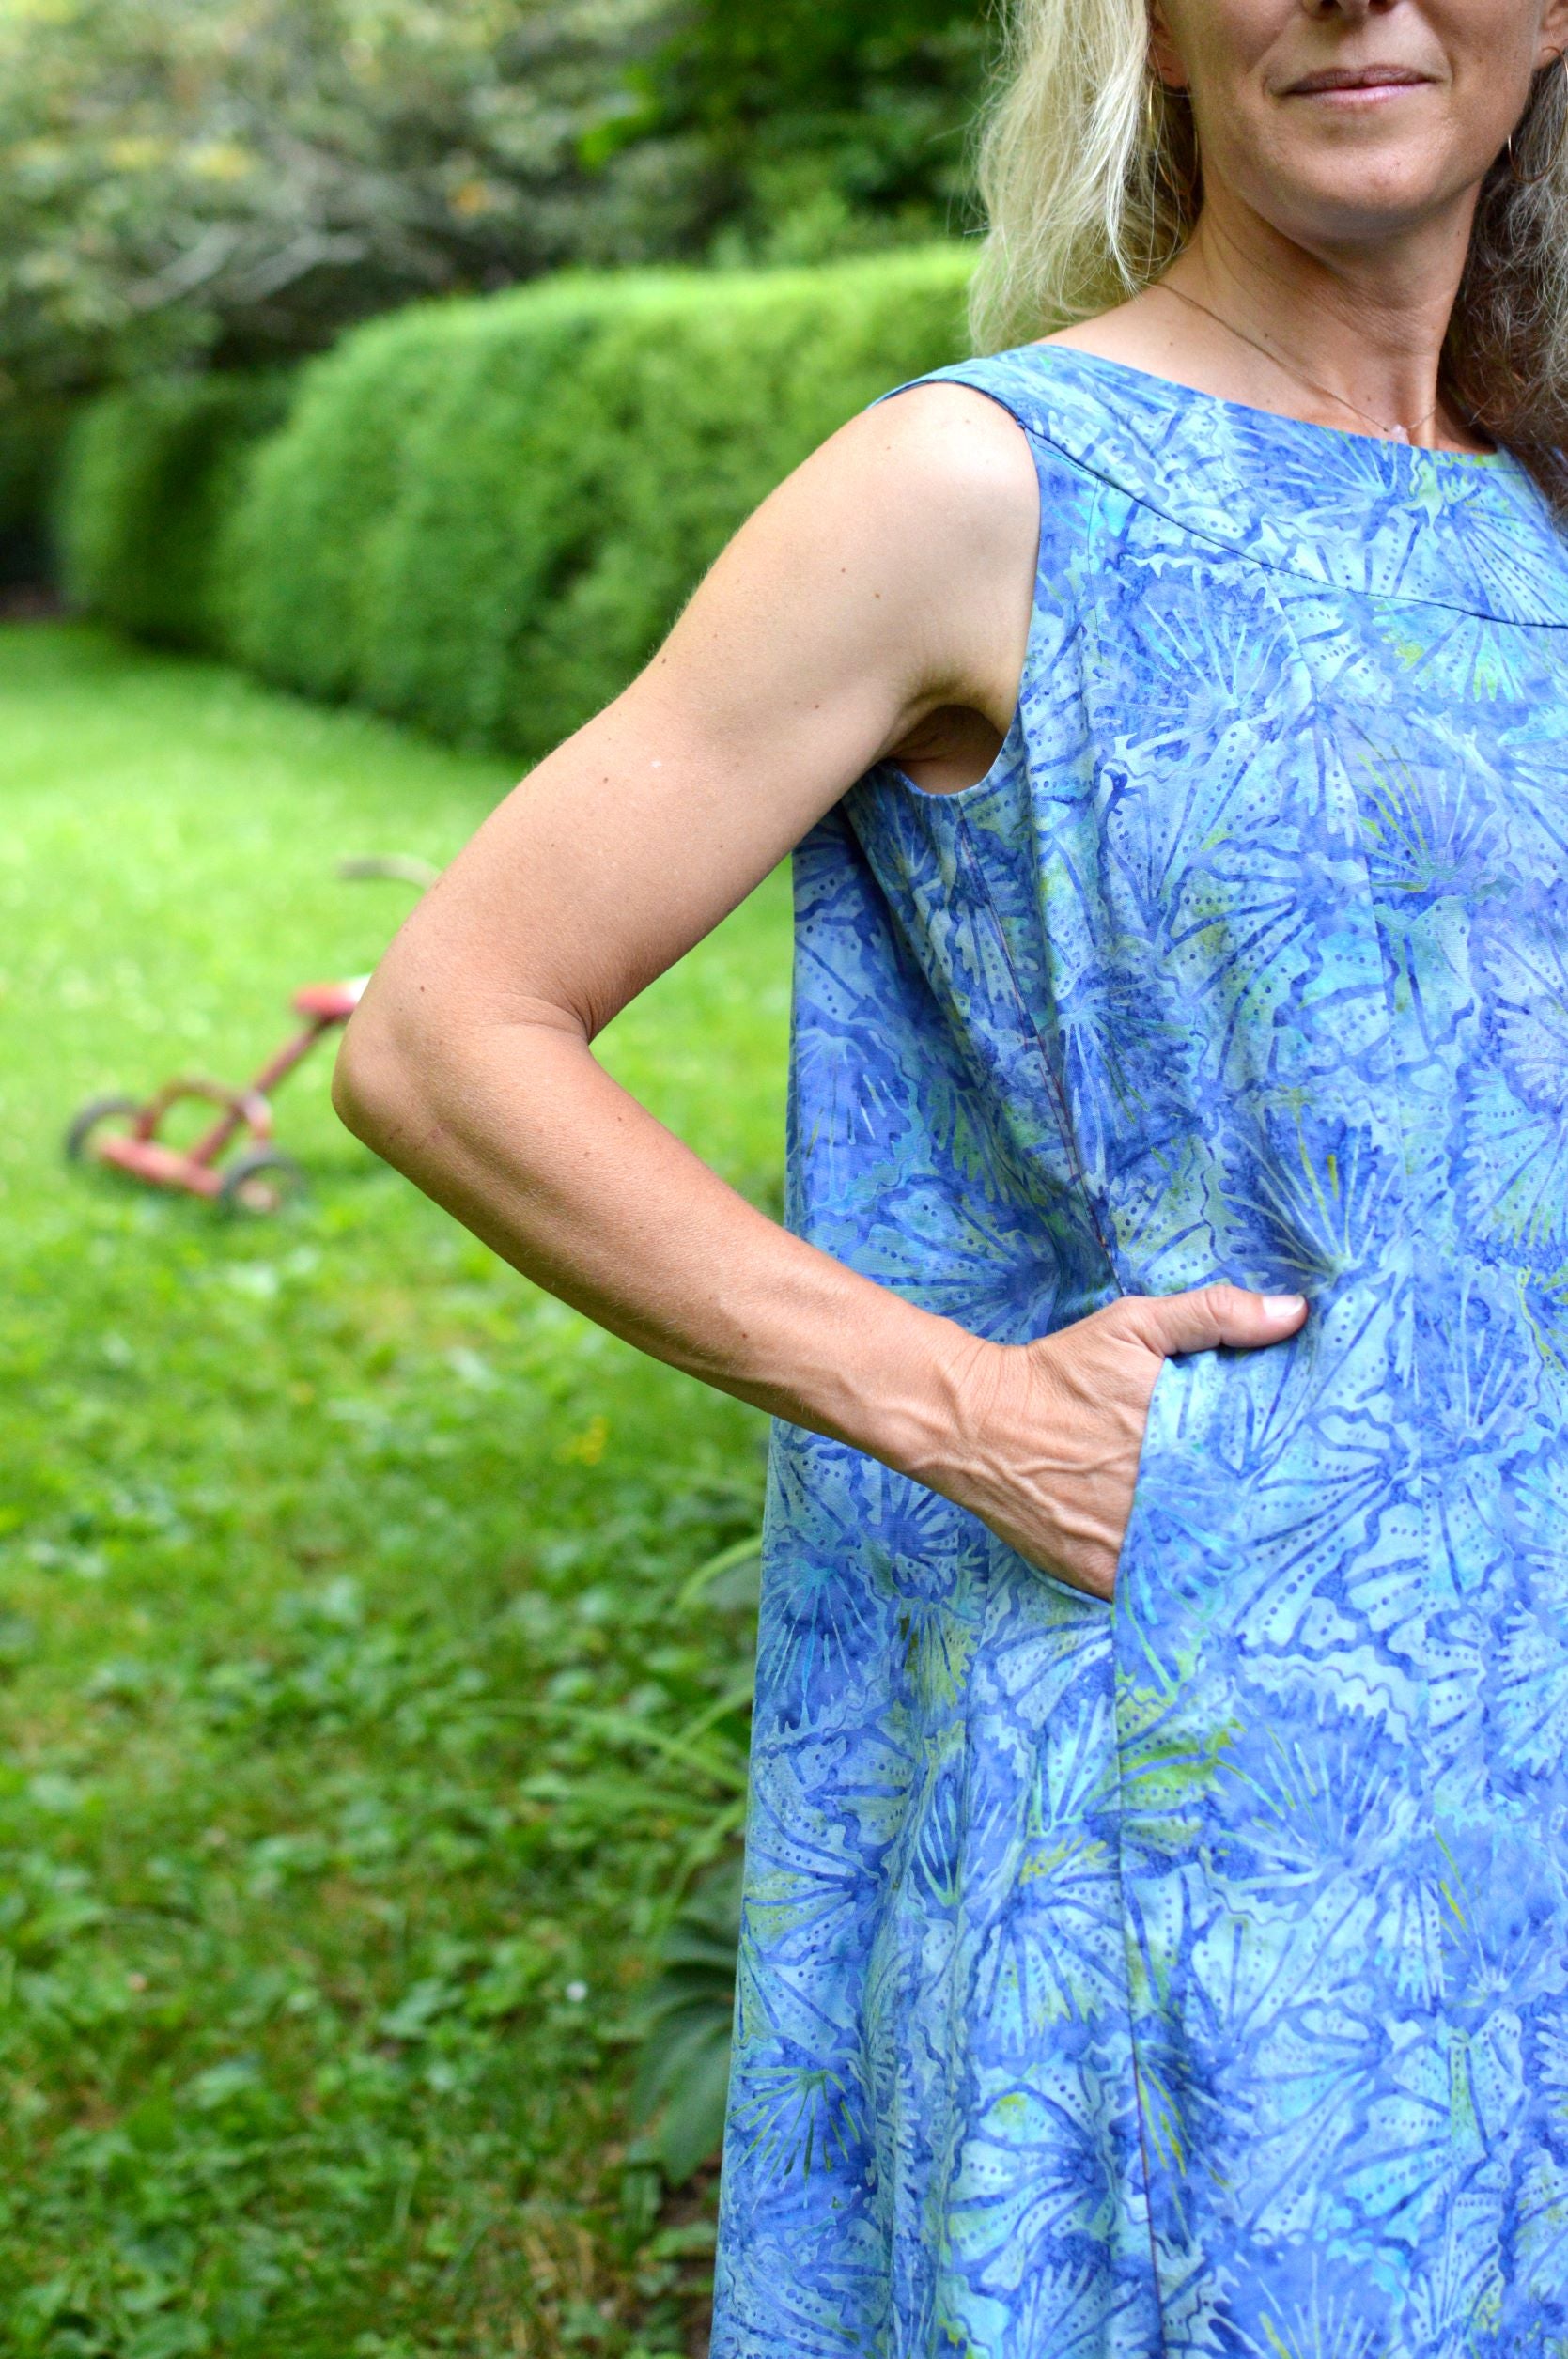 White woman wearing a sleeveless blue batiked muumuu, standing outside by shrubbery.  her hand is in her pocket and view is close up on the pocket.